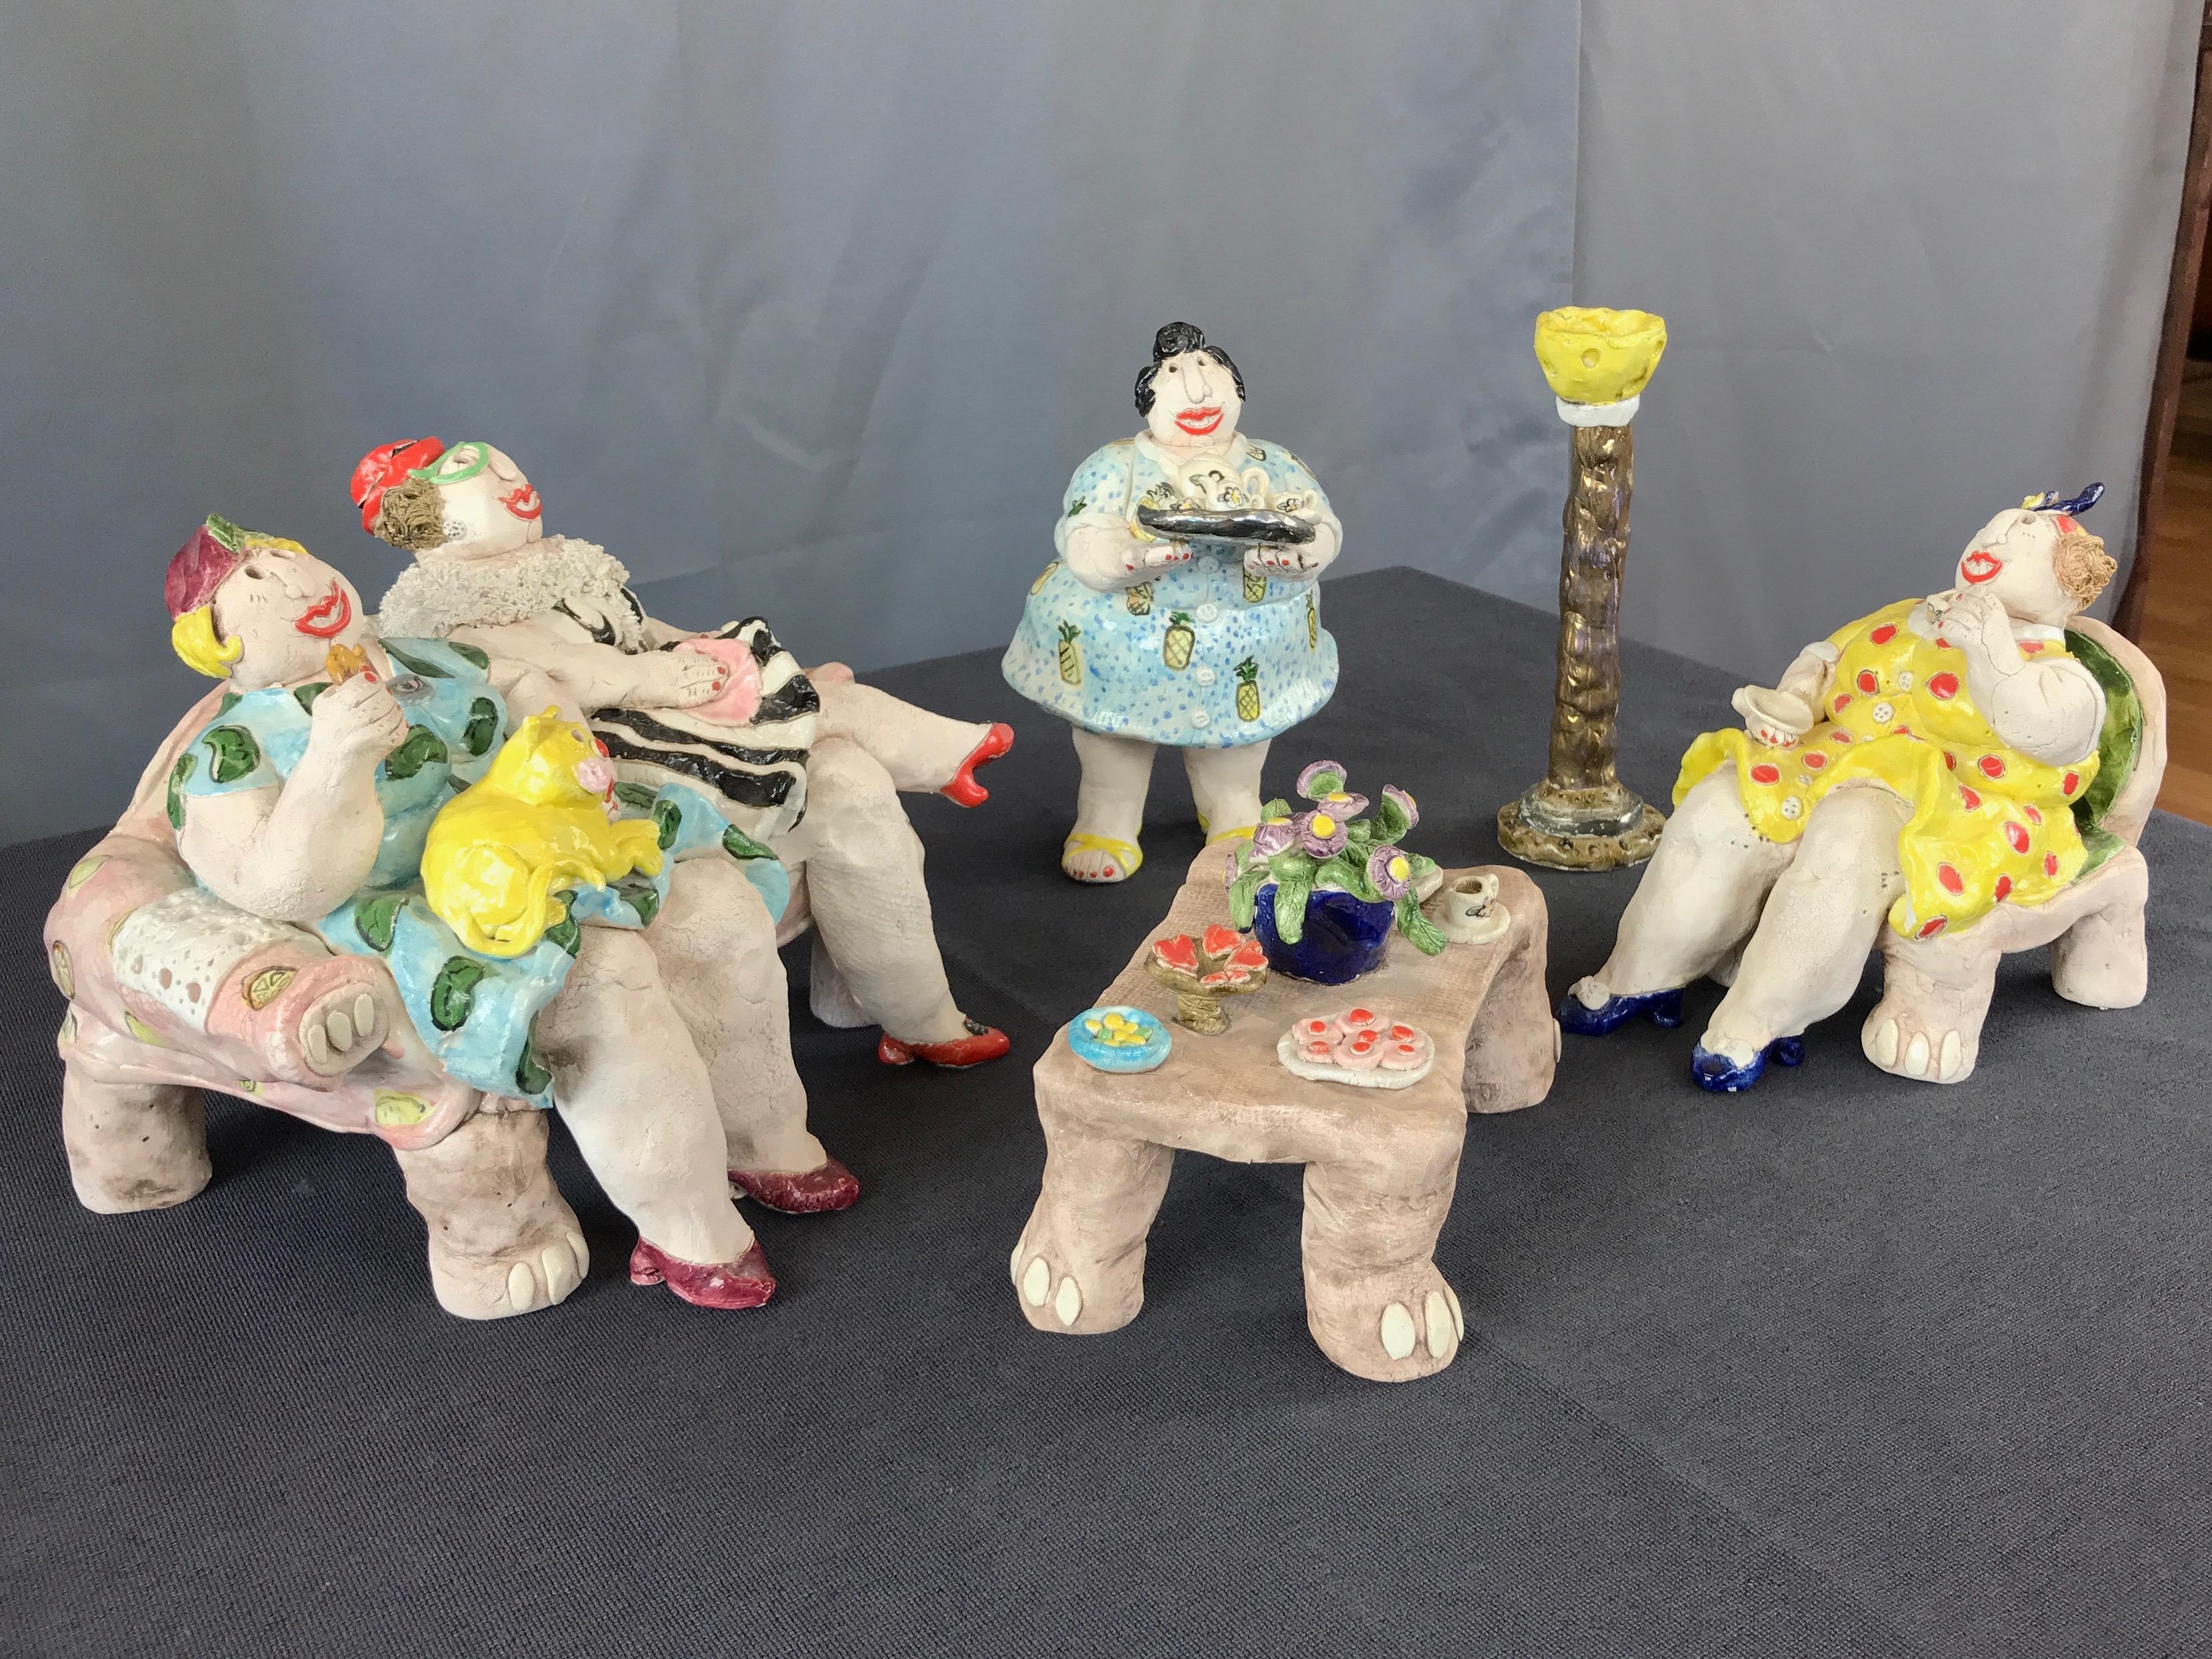 A 1987 five-piece ceramic sculpture of ladies at tea by Sonoma, California, artist Cynthia Hipkiss (b. 1948).

Whimsical vignette full of witty details depicting a lively sitting room tea party attended by a colorful quartet of carefree women.